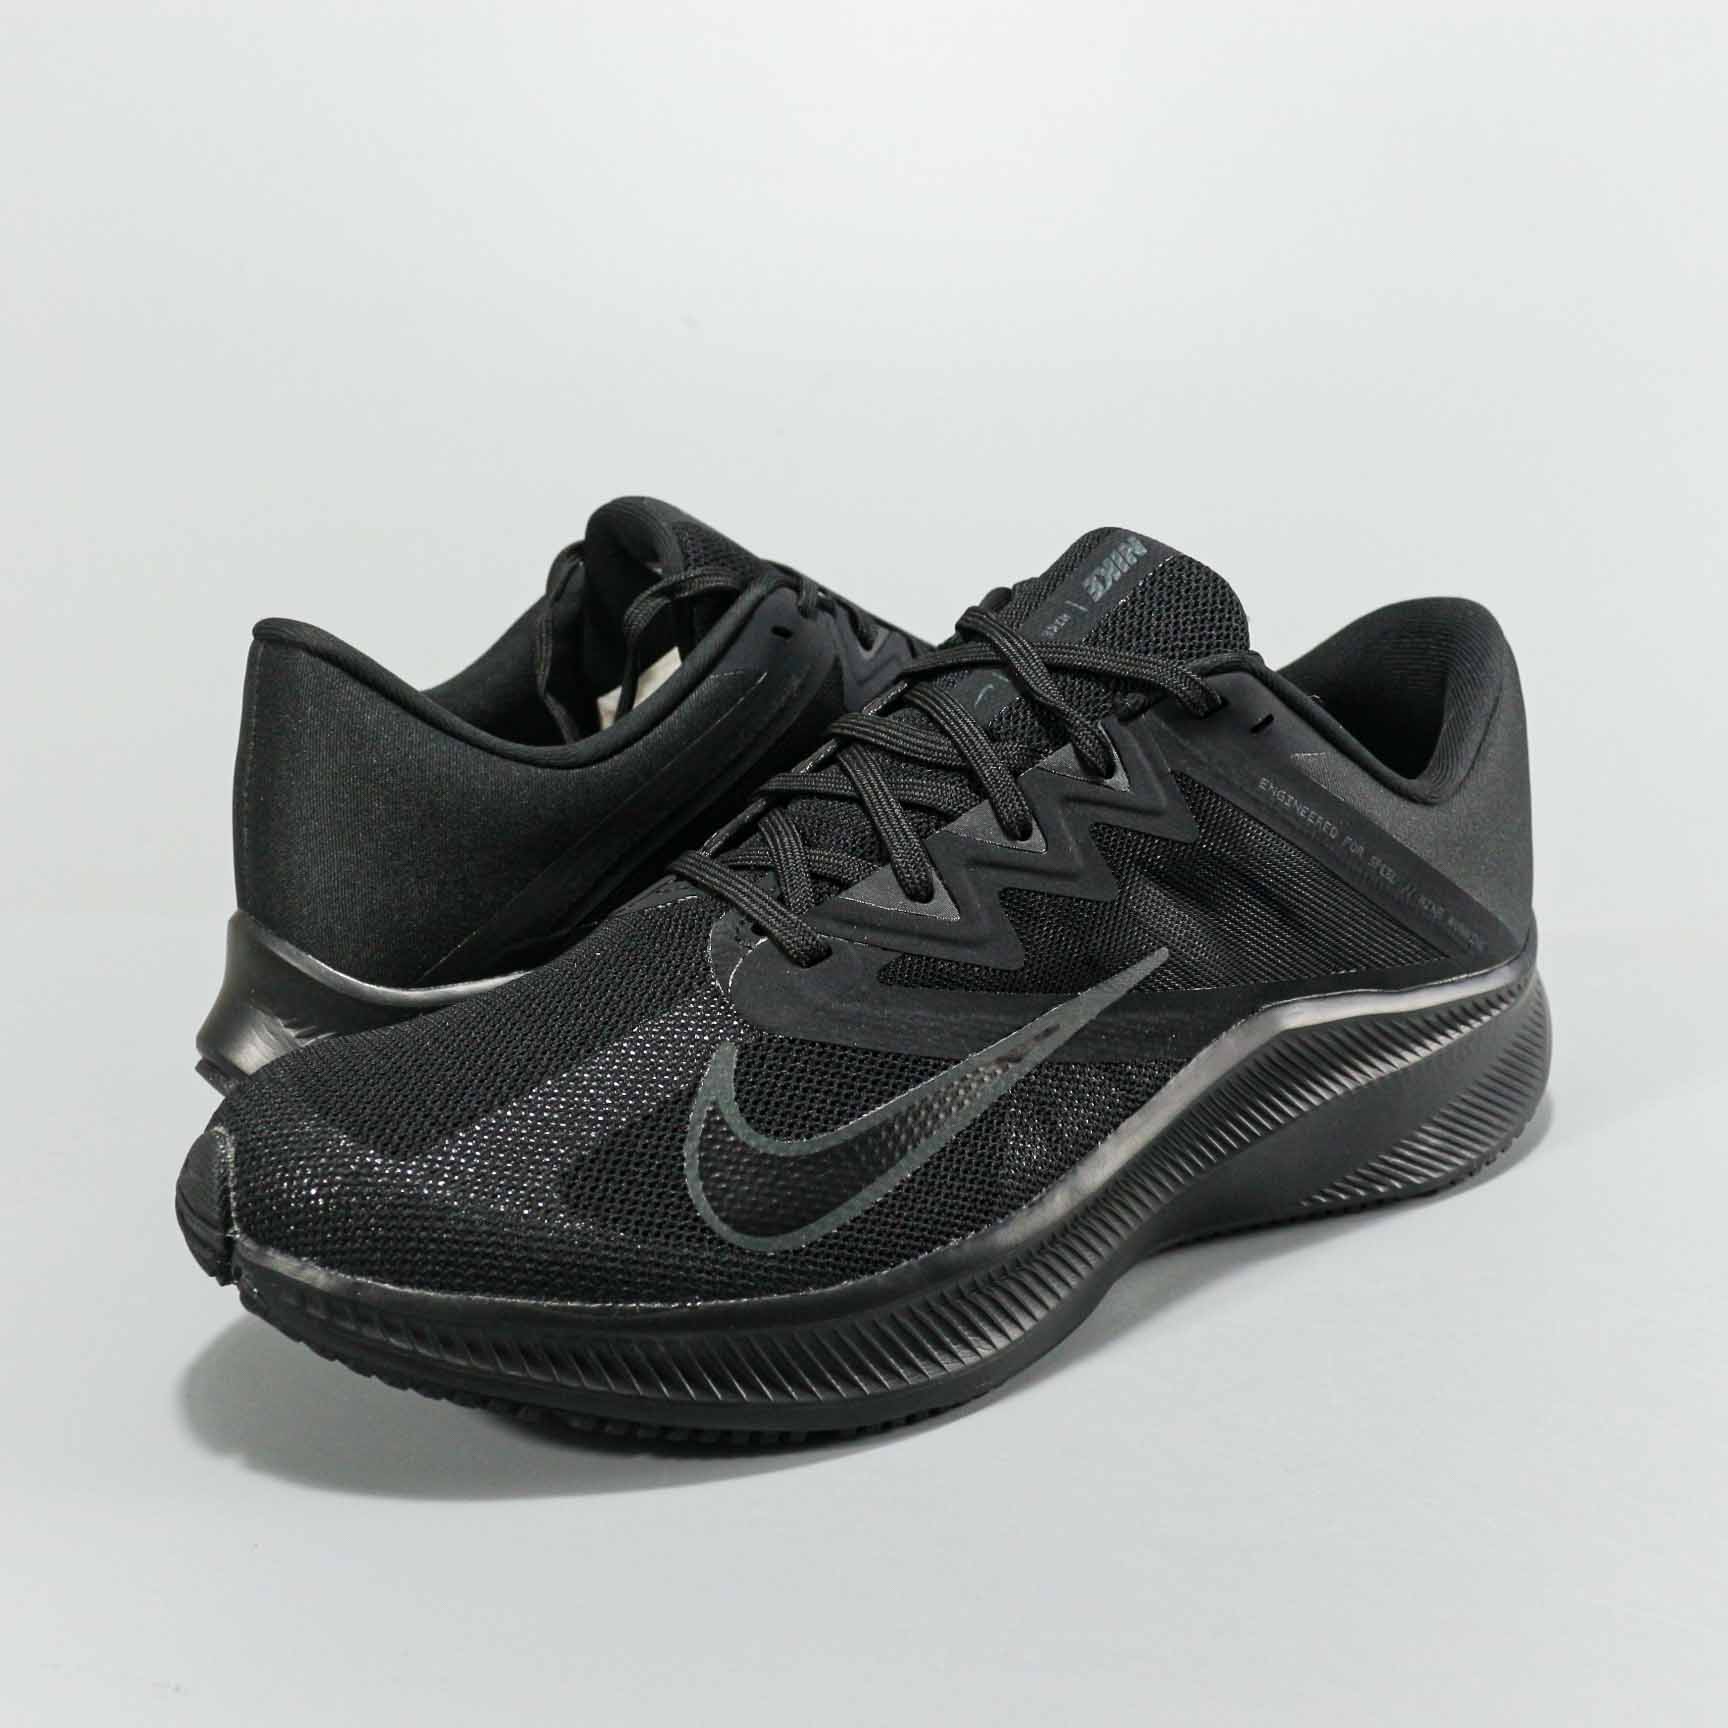 Nike Quest III All Black Running Shoes